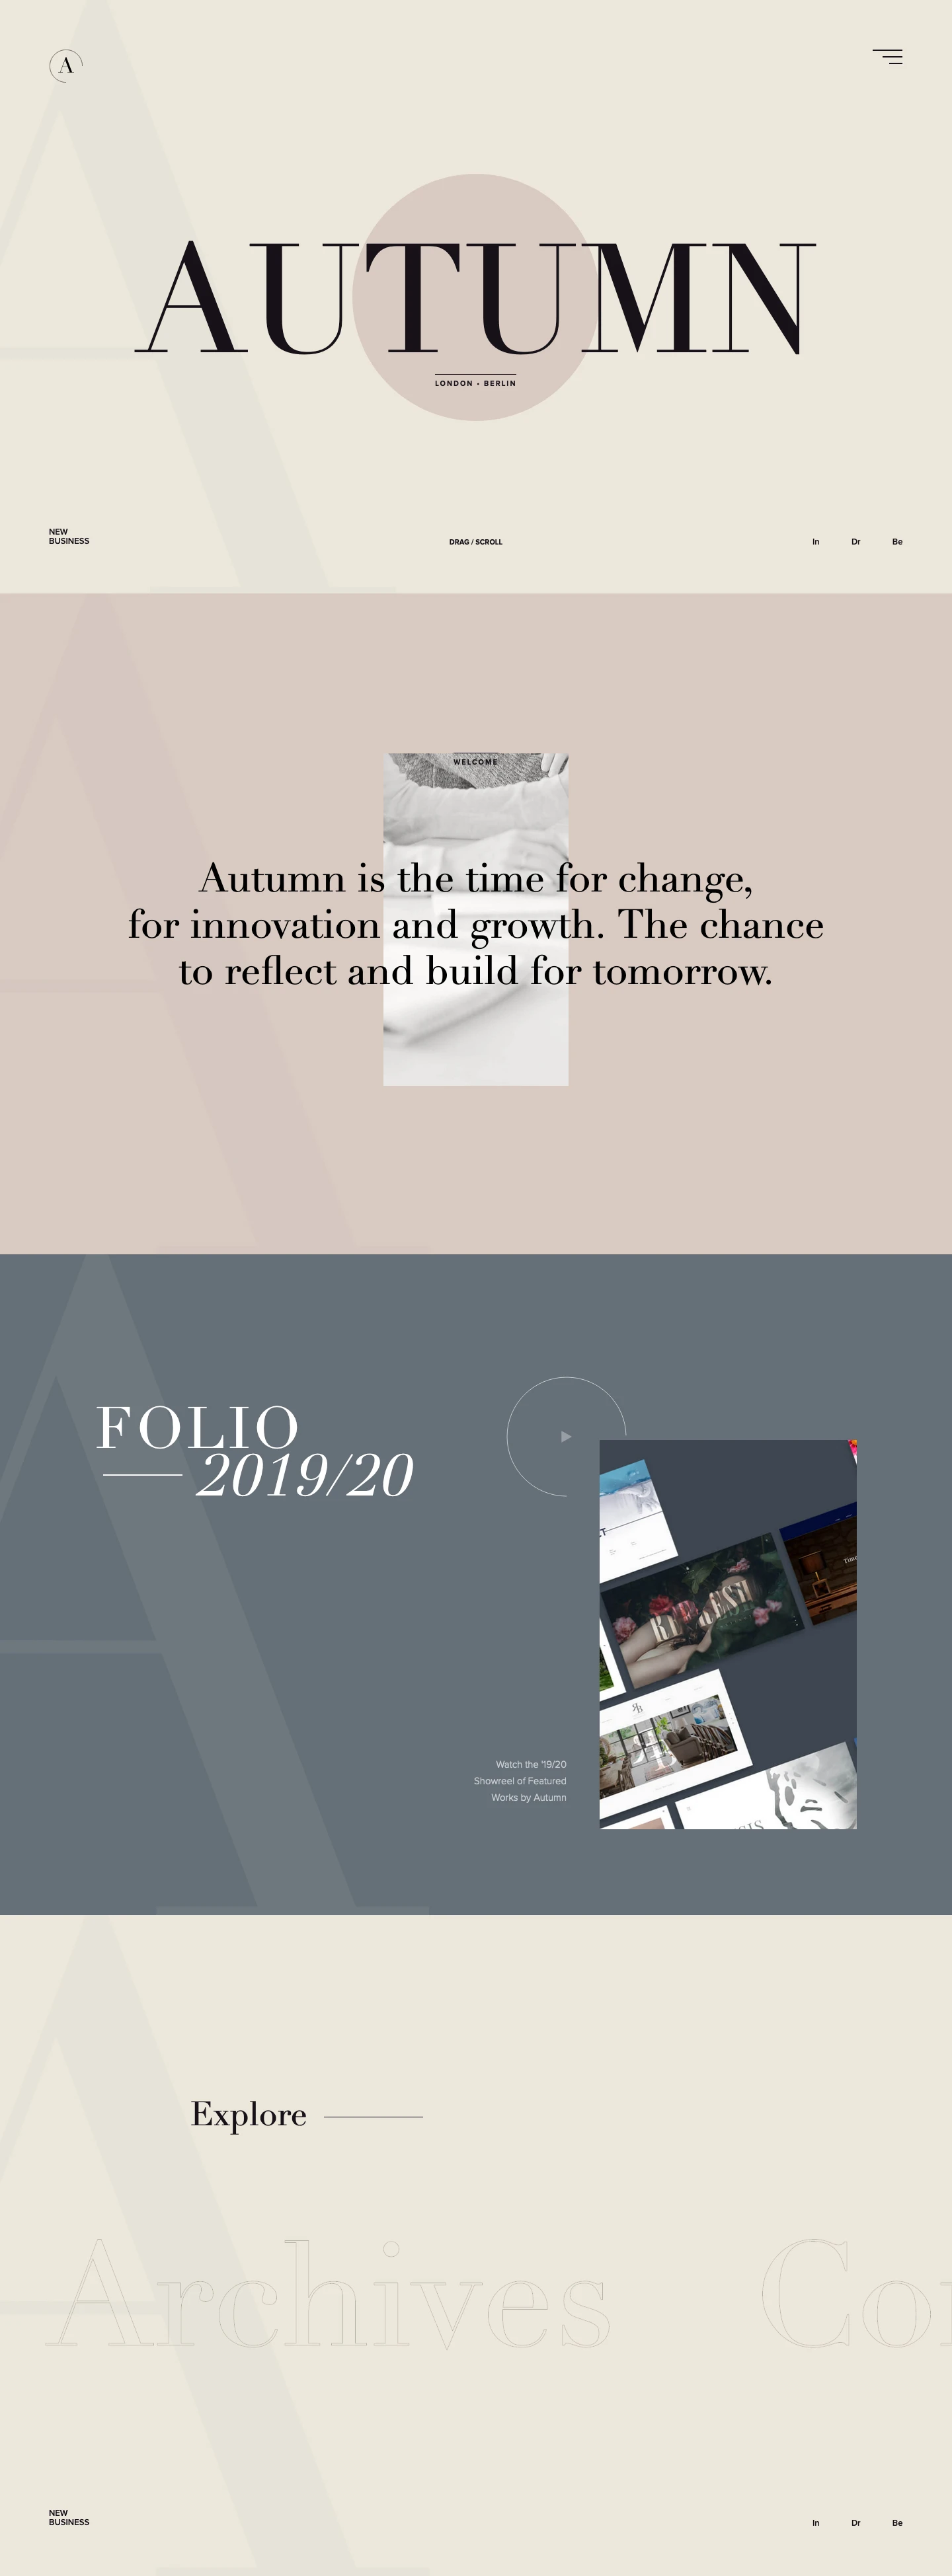 Autumn Agency Landing Page Example: Autumn is the time for change, for innovation and growth. The chance to reflect and build for tomorrow.